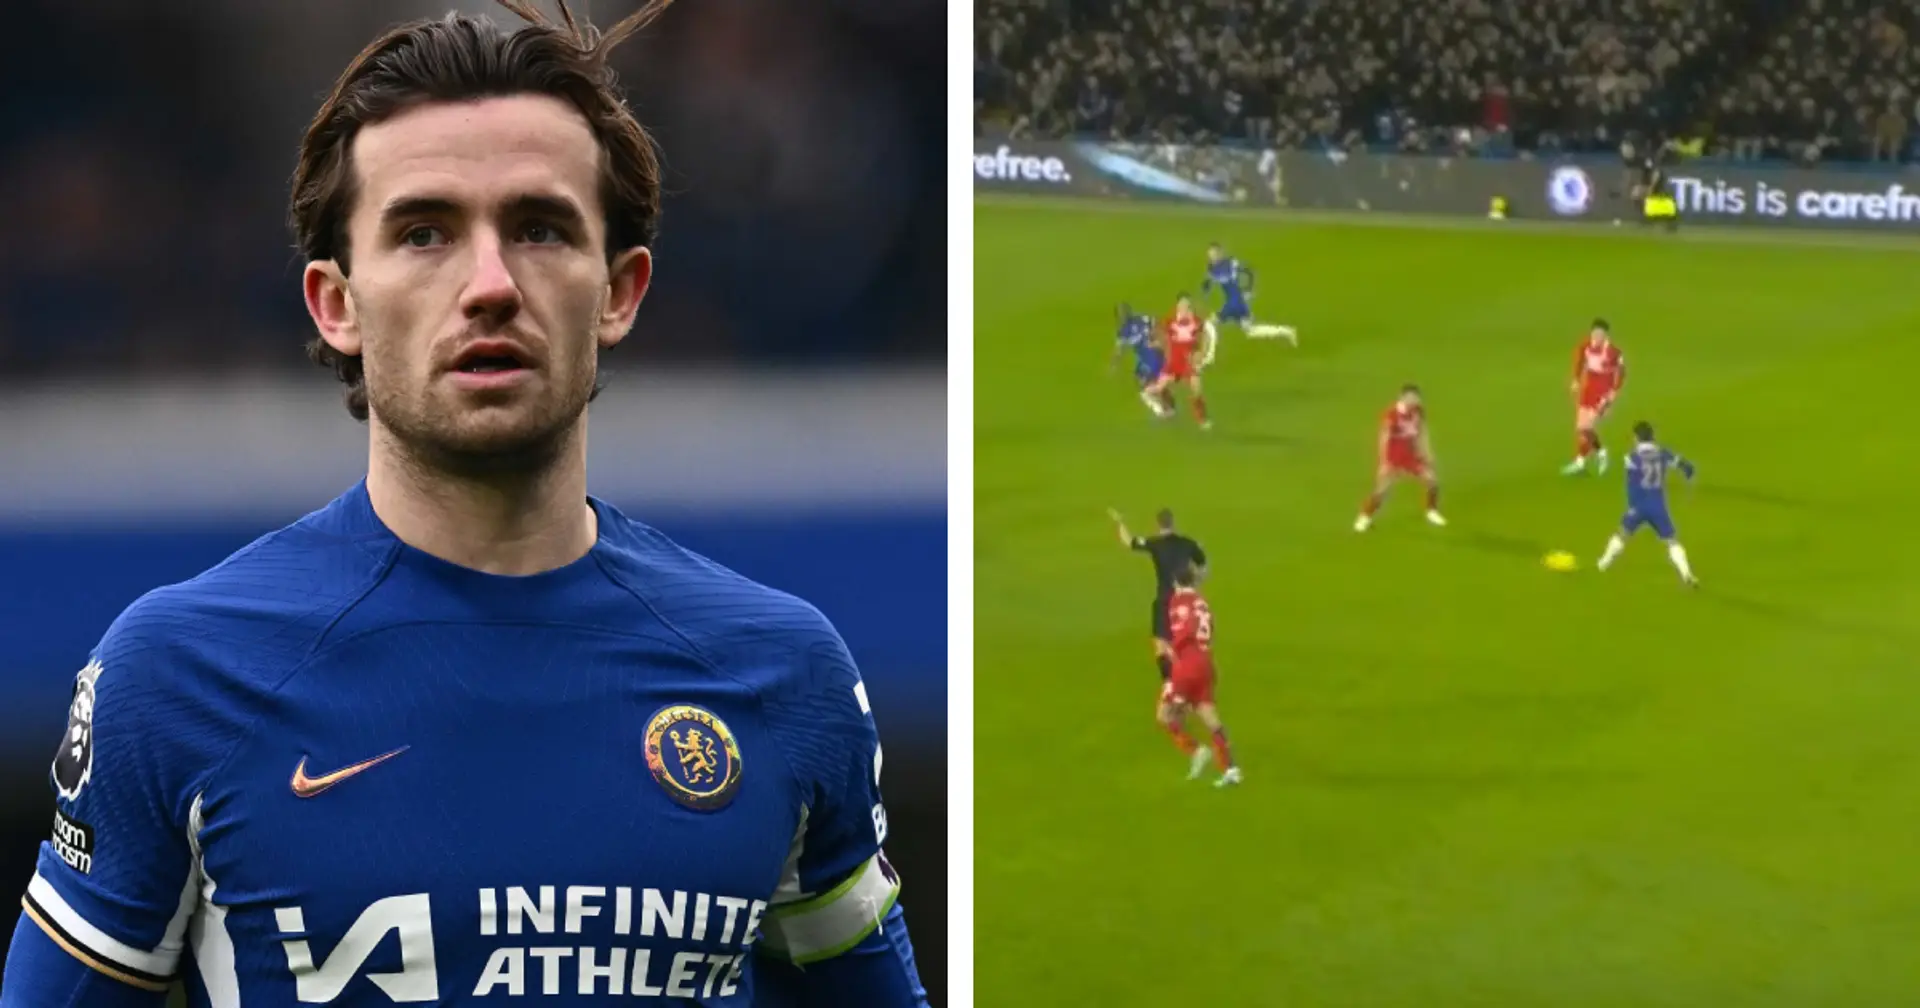 'Fair play to him': fans applaud Chilwell after his role in Chelsea's opener v Boro